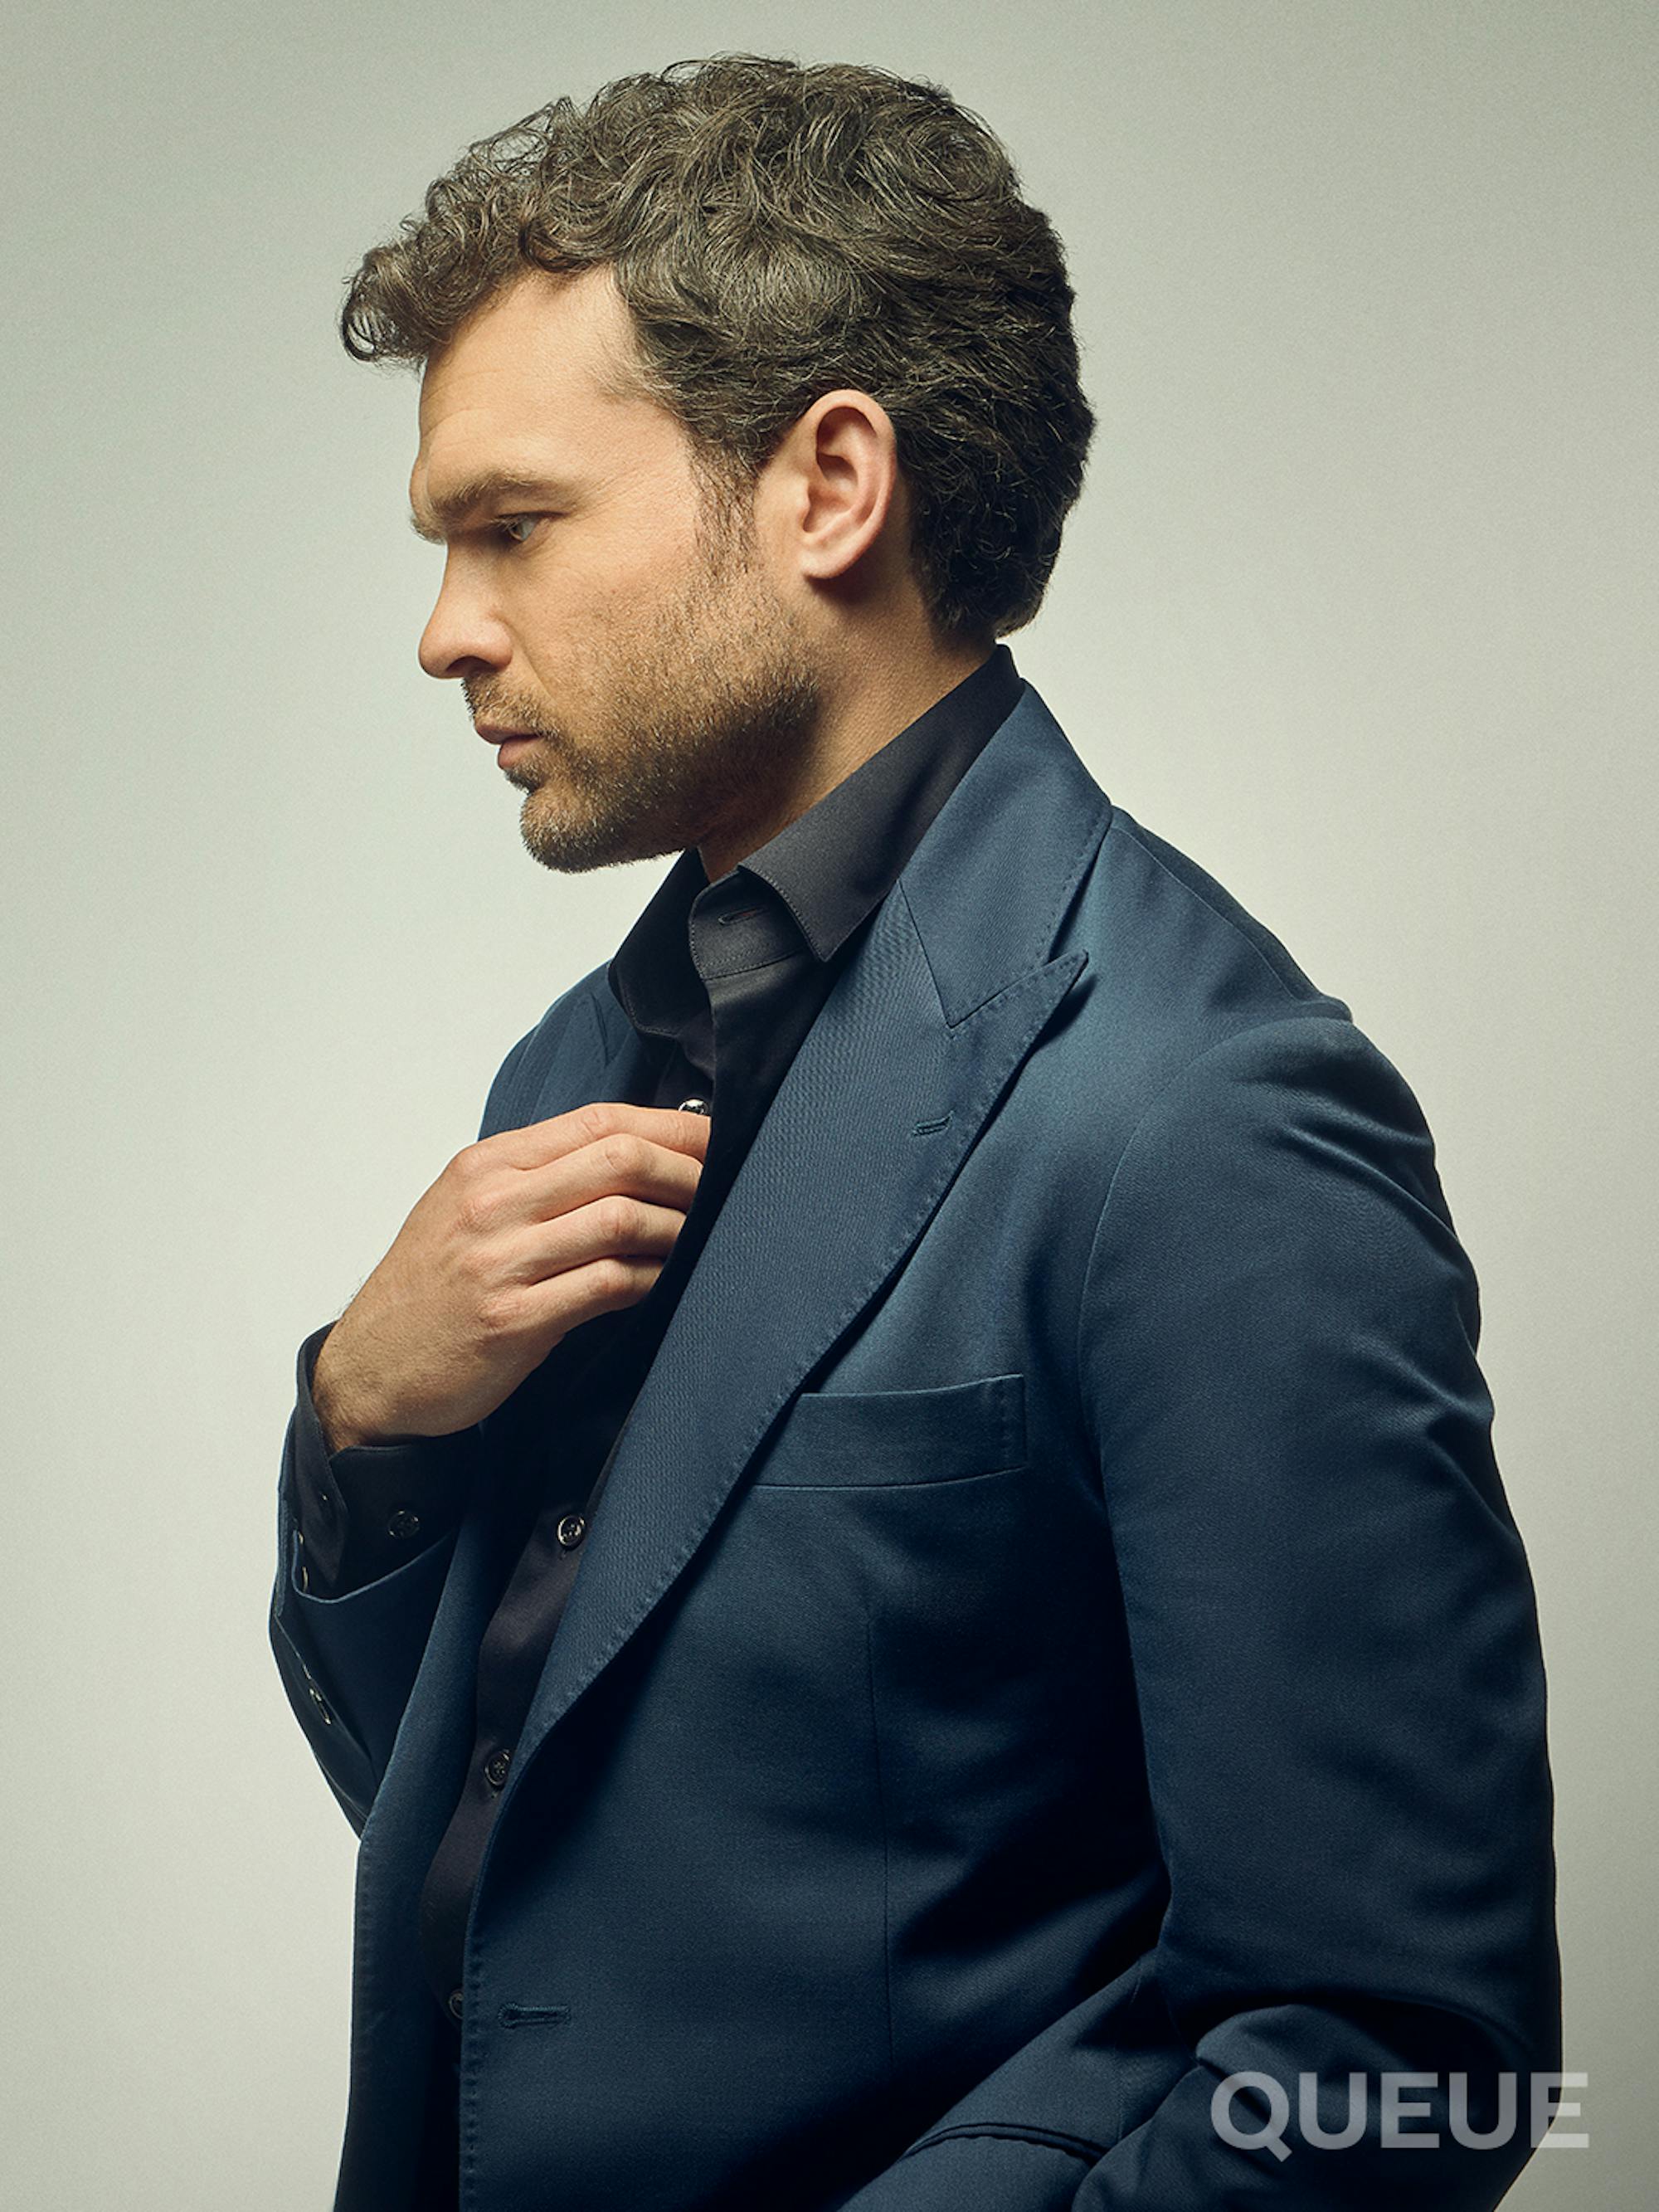 Alden Ehrenreich stands in profile and wears a navy suit.